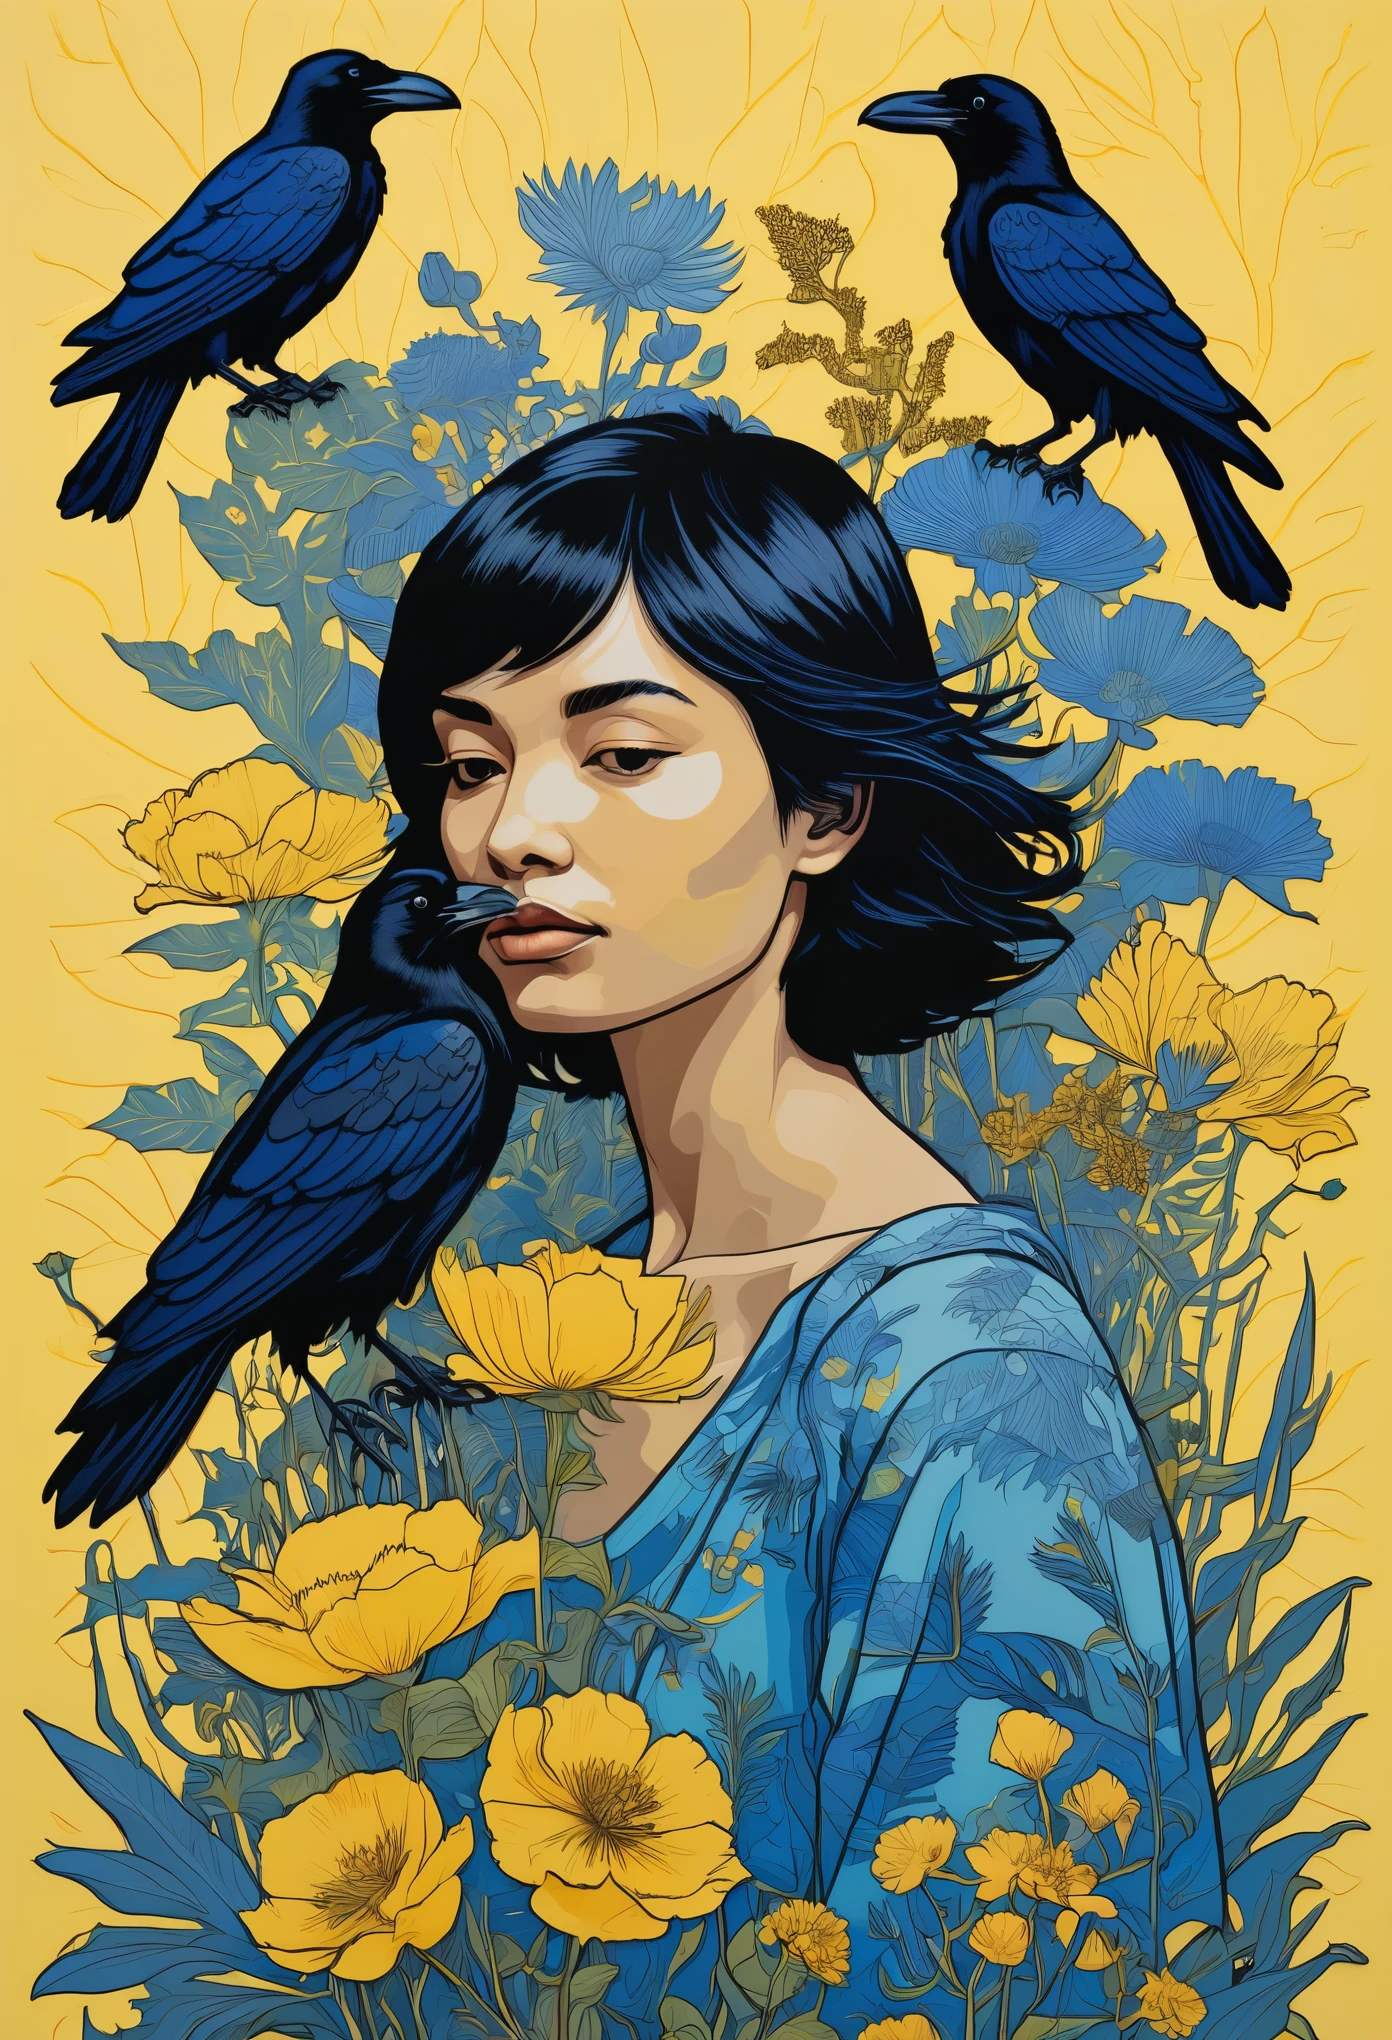 A blue woman with black hair and two ravens in the style of Jimilla against a yellow background, in a surreal collage art style with colorful woodcut prints featuring nature inspired imagery and lively coastal landscapes. The androgynous figure is surrounded by plants and flowers, with one raven sitting on her shoulder while another perches above head level. This scene conveys a sense of calmness or solitude, as if she has been living alone for many years.